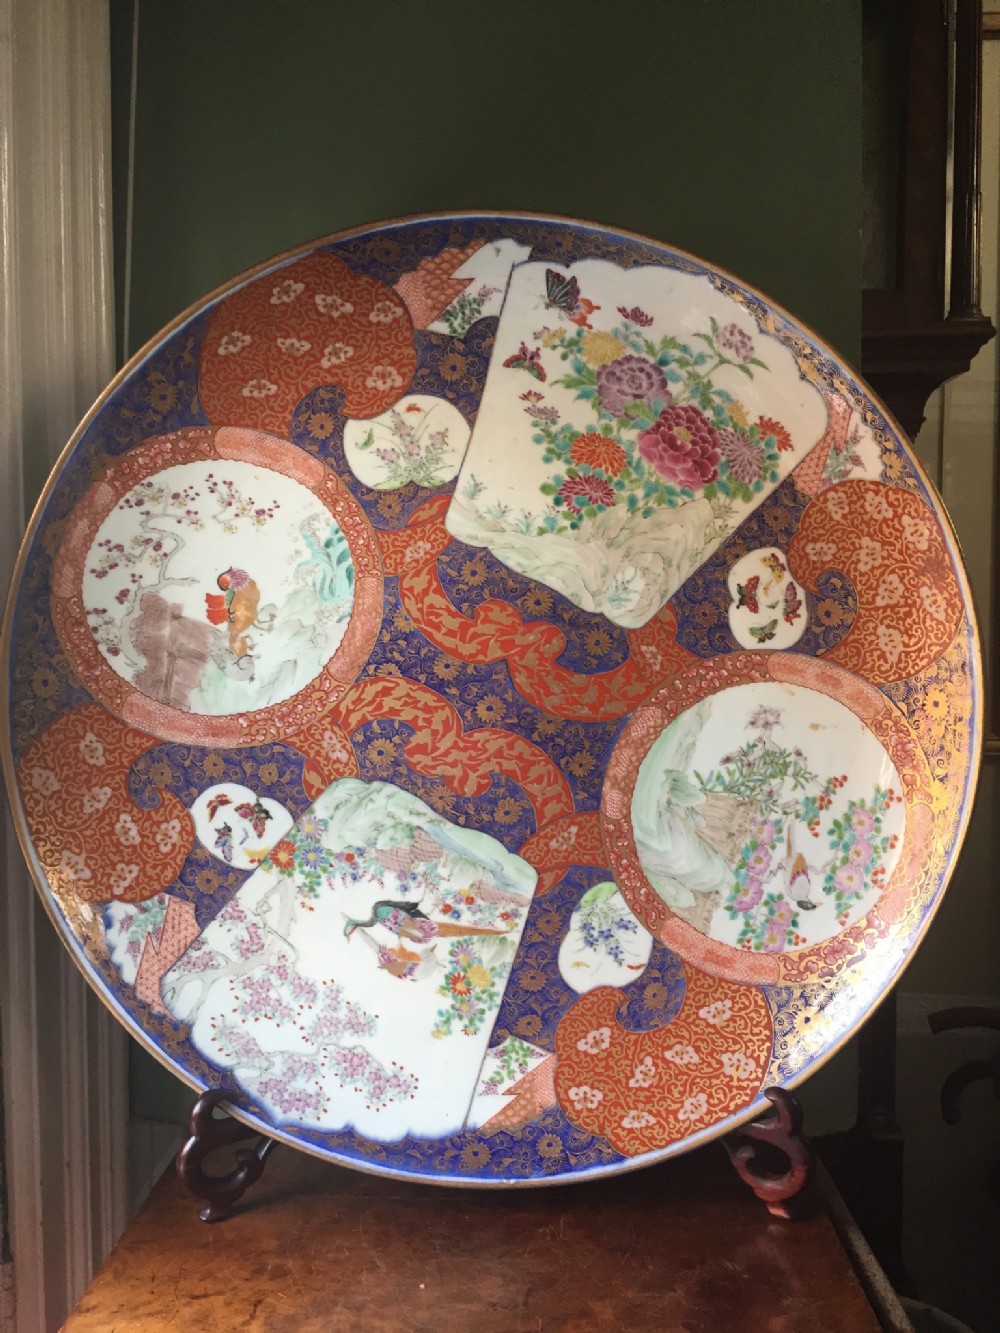 magnificent exhibition quality c19th meiji period japanese porcelain charger of impressive large scale decorated in the imari palette